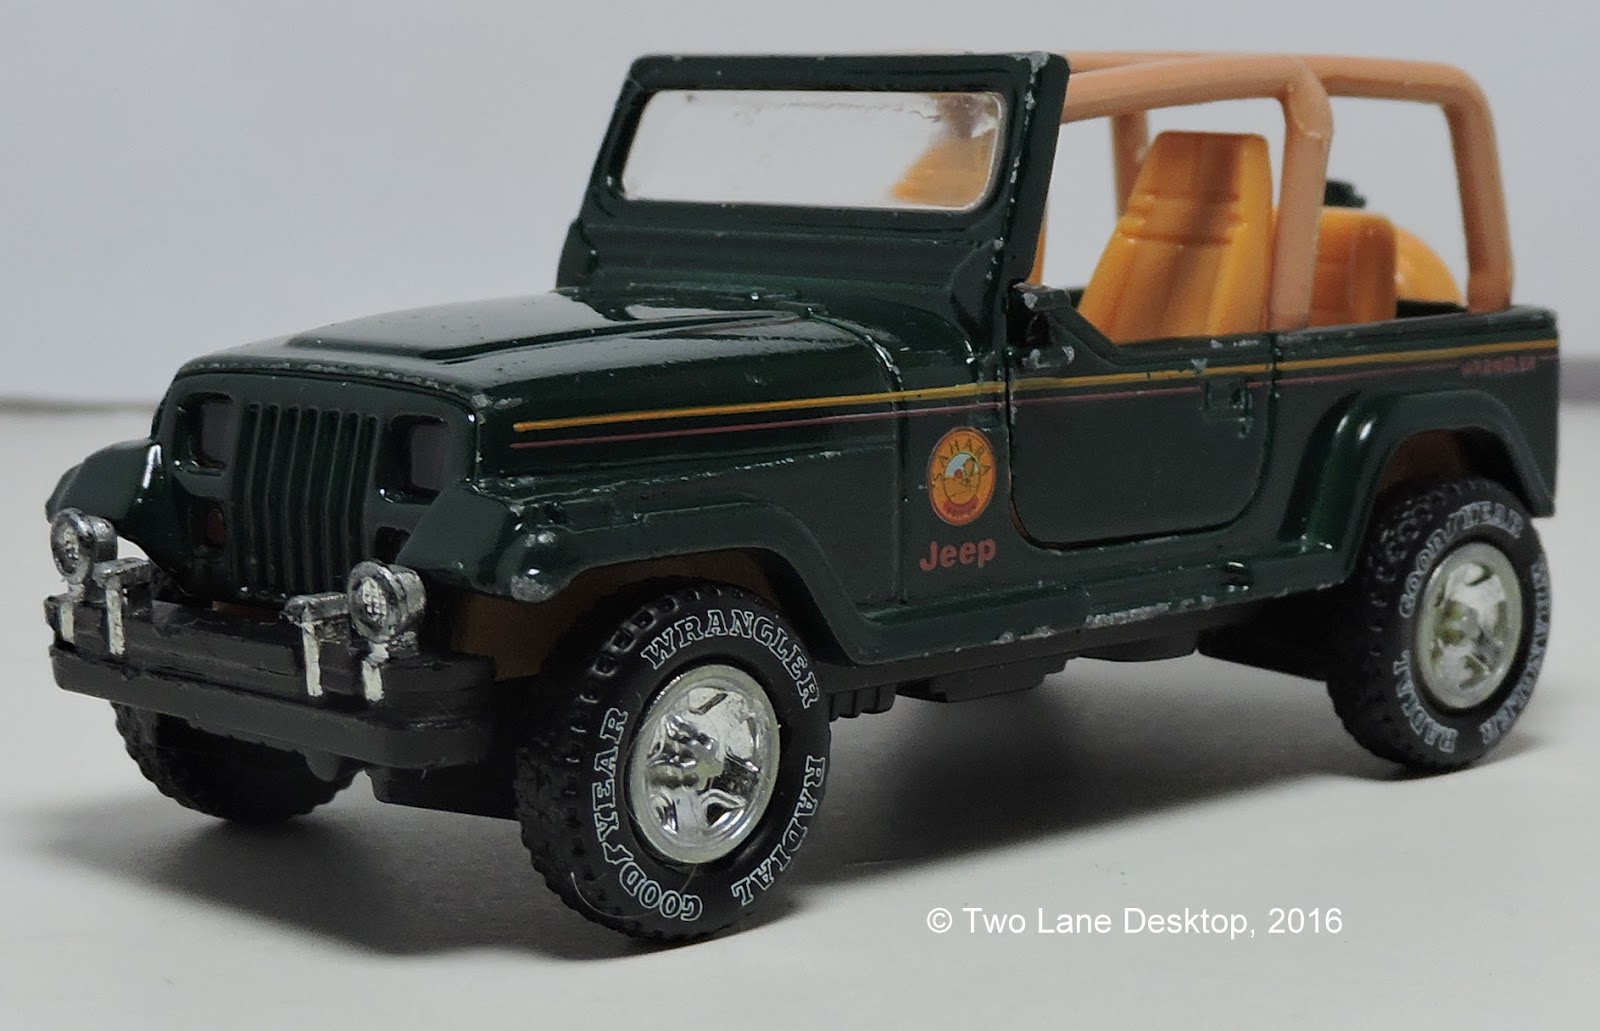 Greenlight and Road Champs 1987-1995 Jeep Wrangler YJ